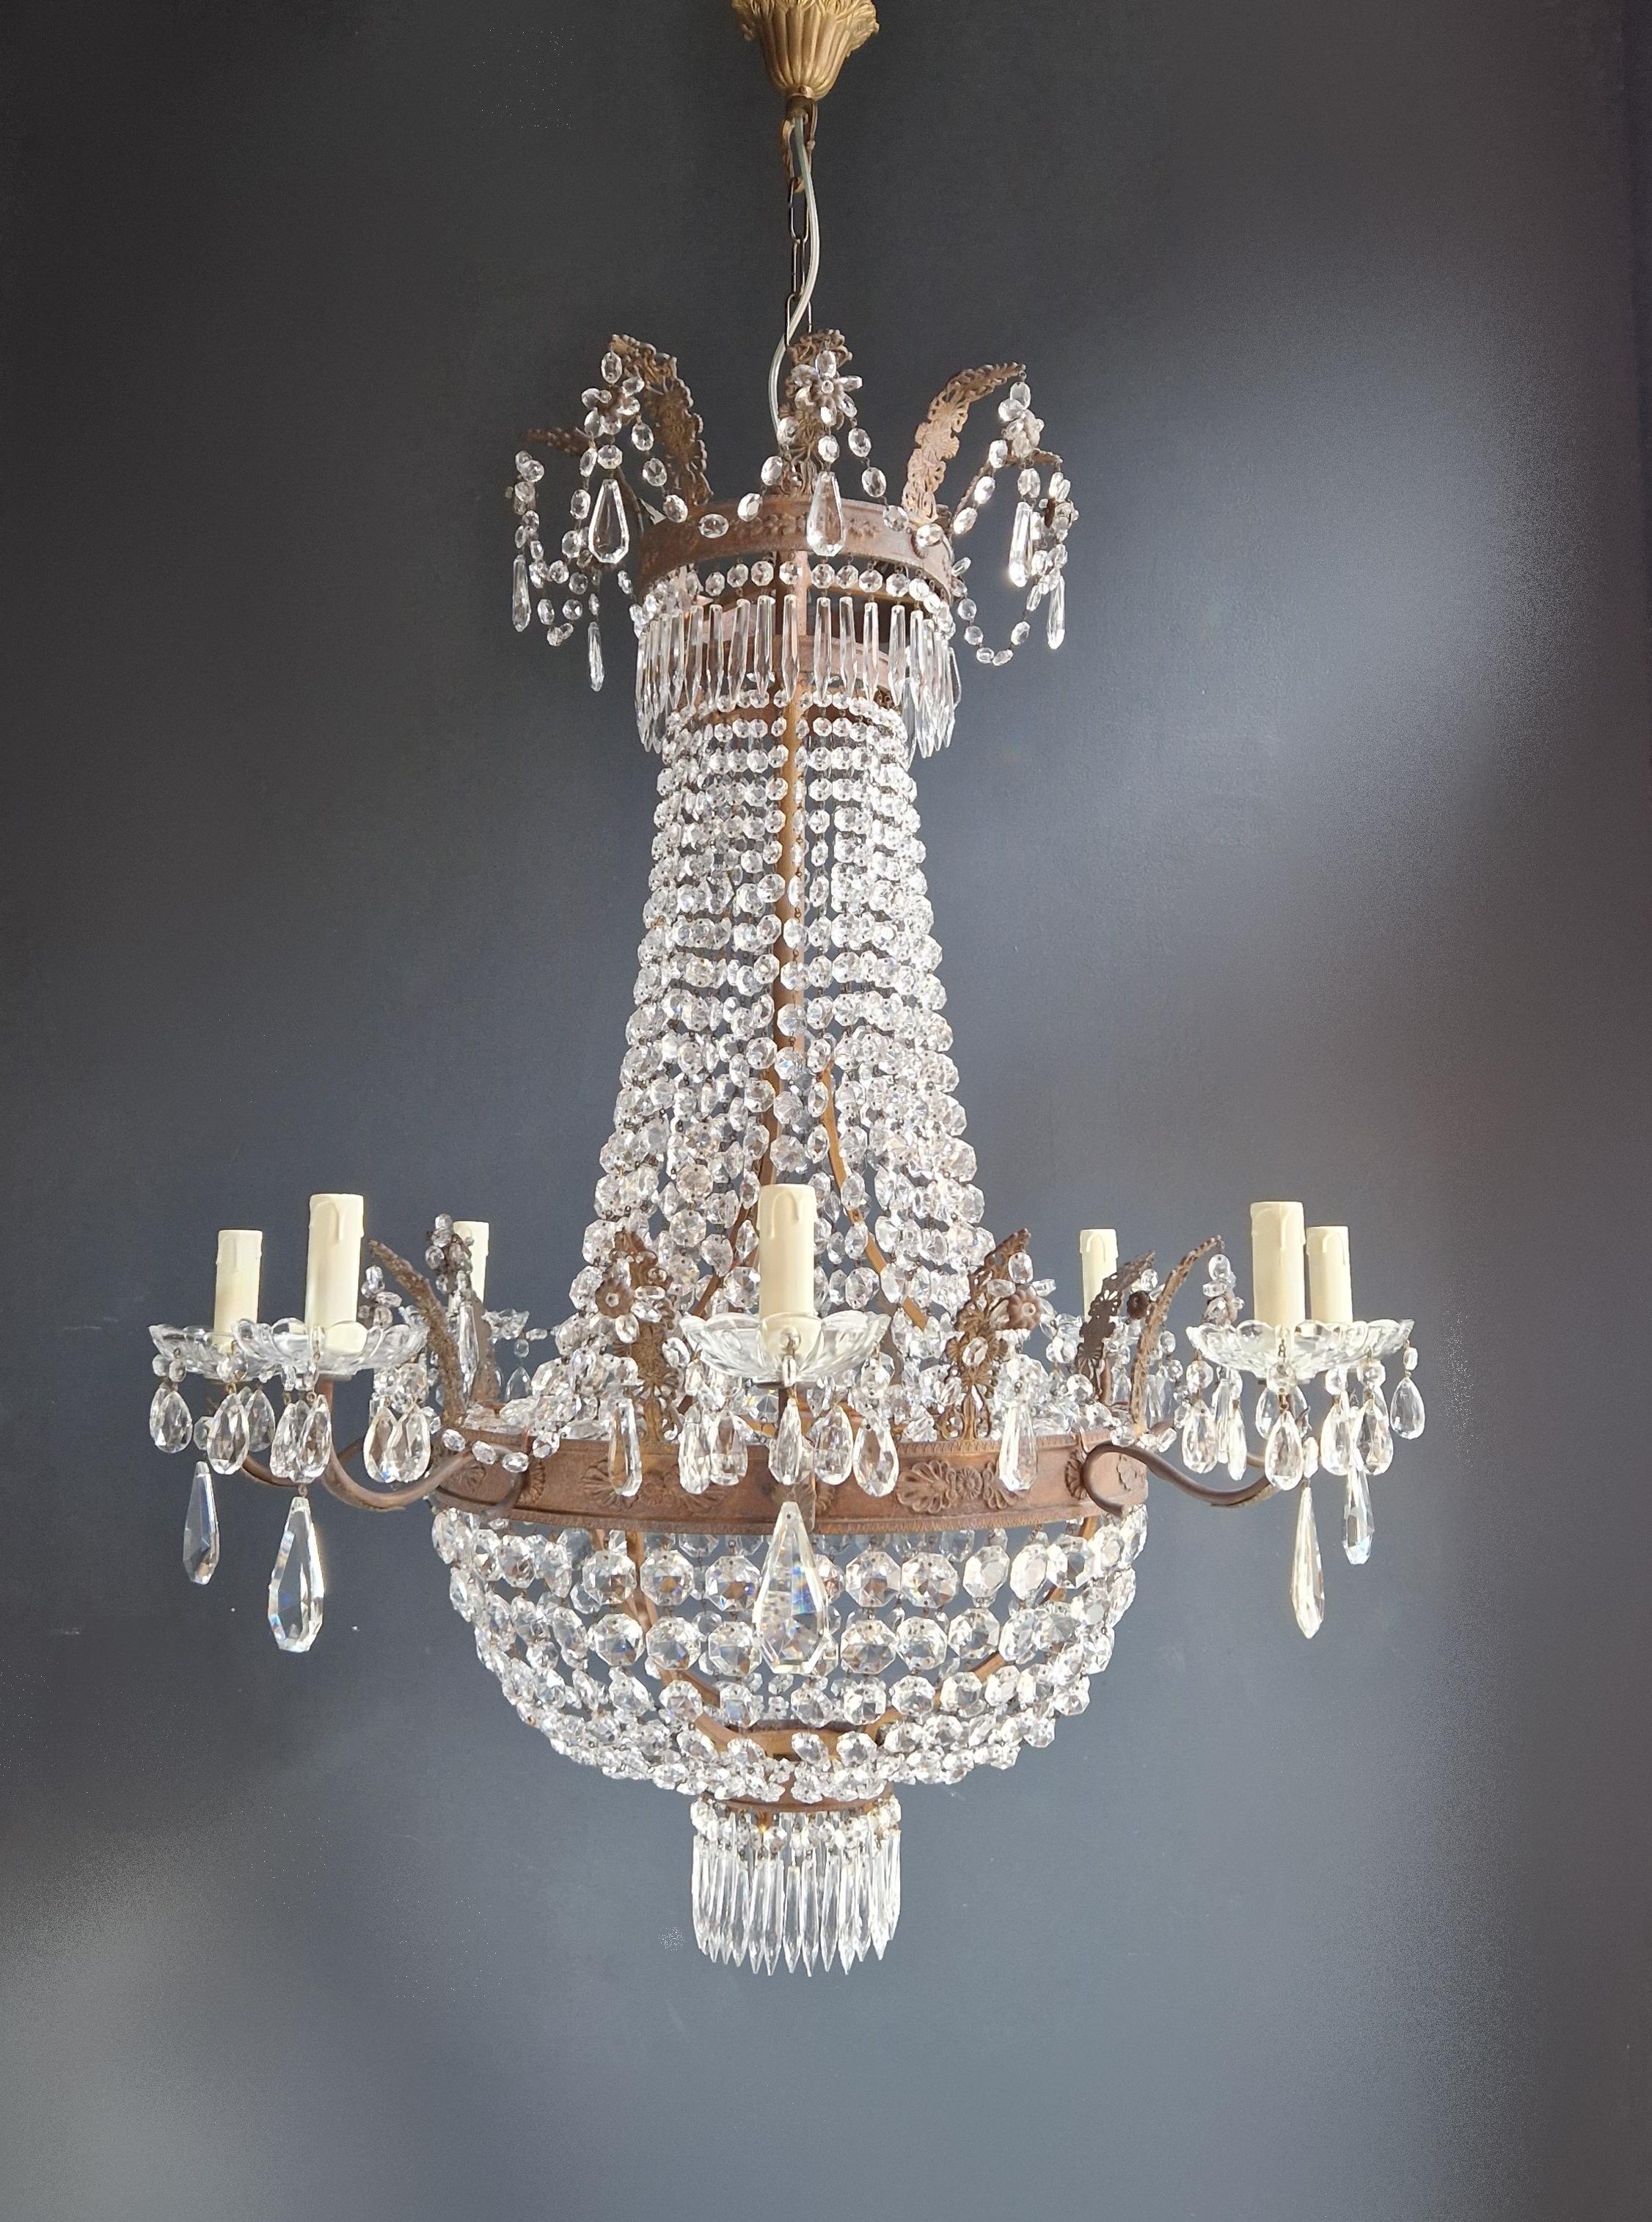 Old chandelier with love and professionally restored in Berlin. electrical wiring works in the US. Re-wired and ready to hang. not one missing. Cabling completely renewed. Crystal, hand-knotted.

Cabling and sockets completely renewed. Crystal hand